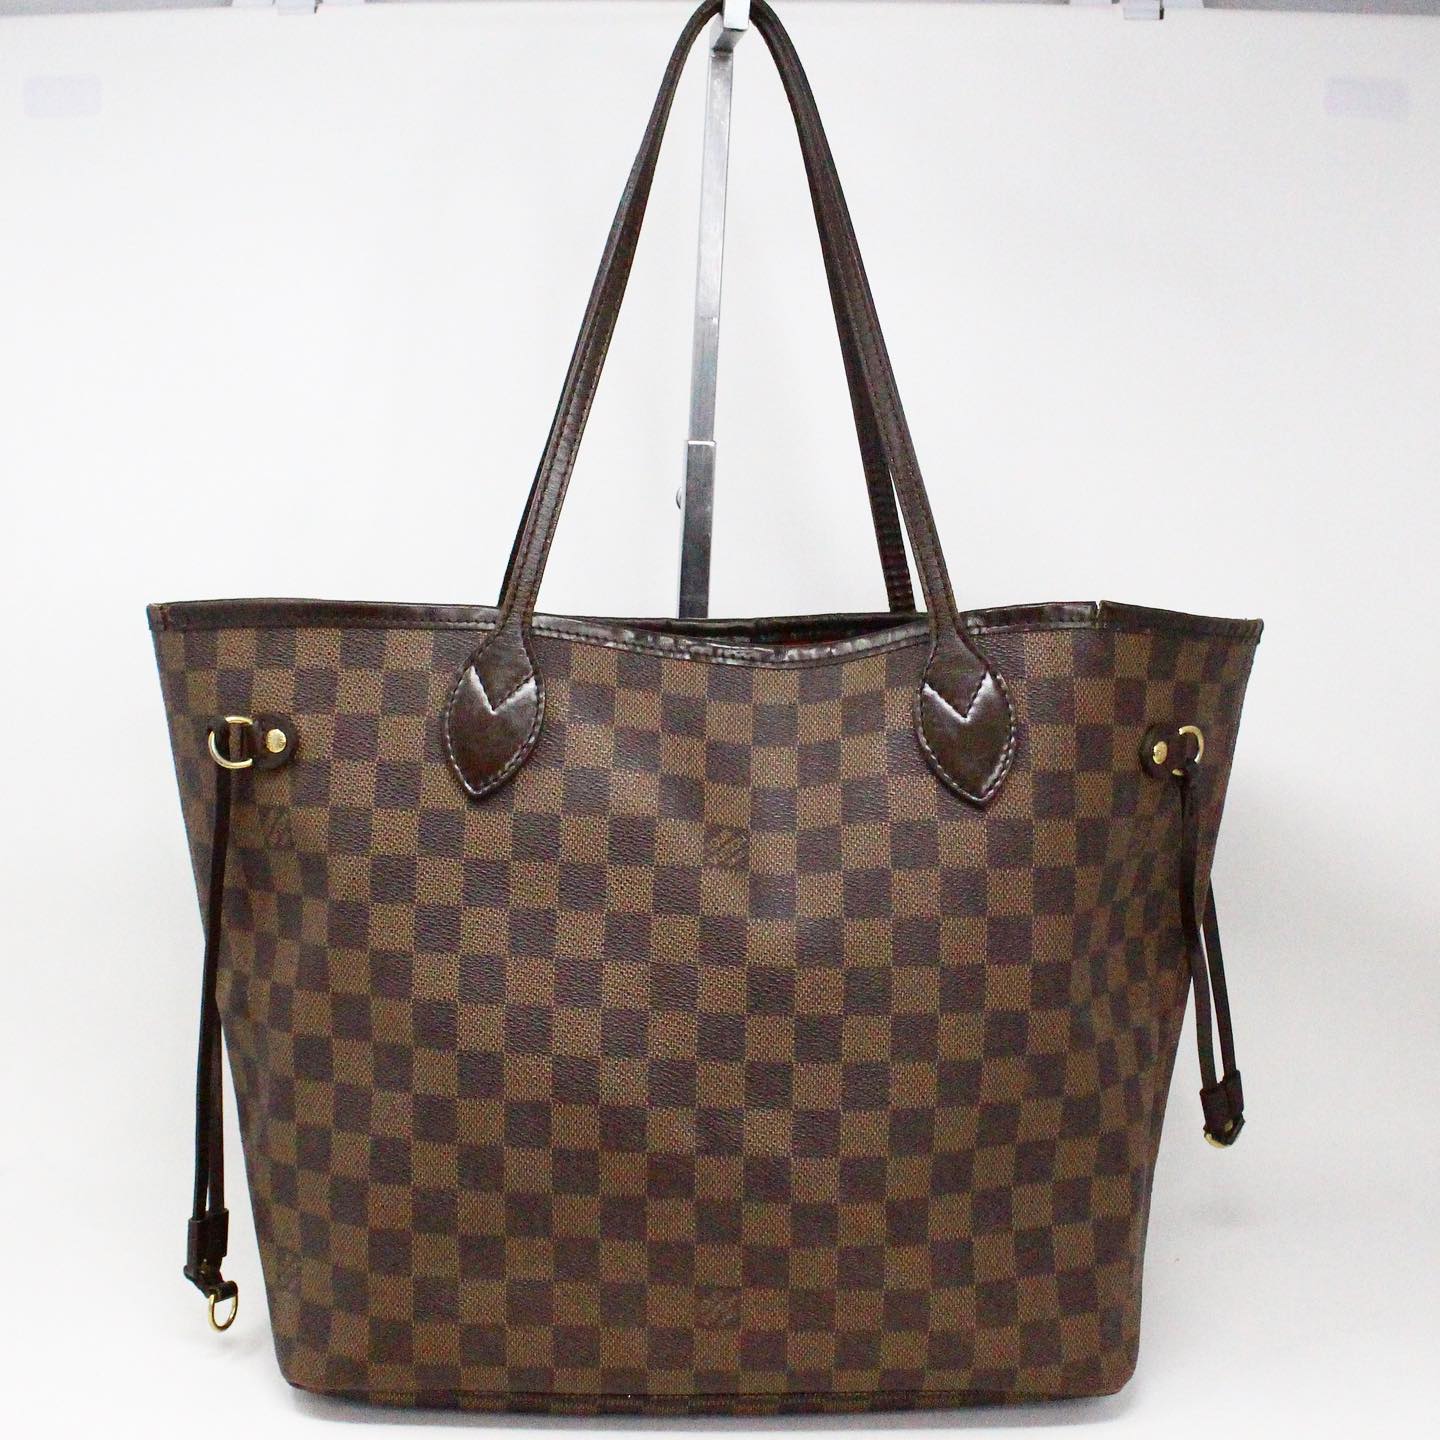 Louis Vuitton 6 Monogram with Damier Leather Face mask use